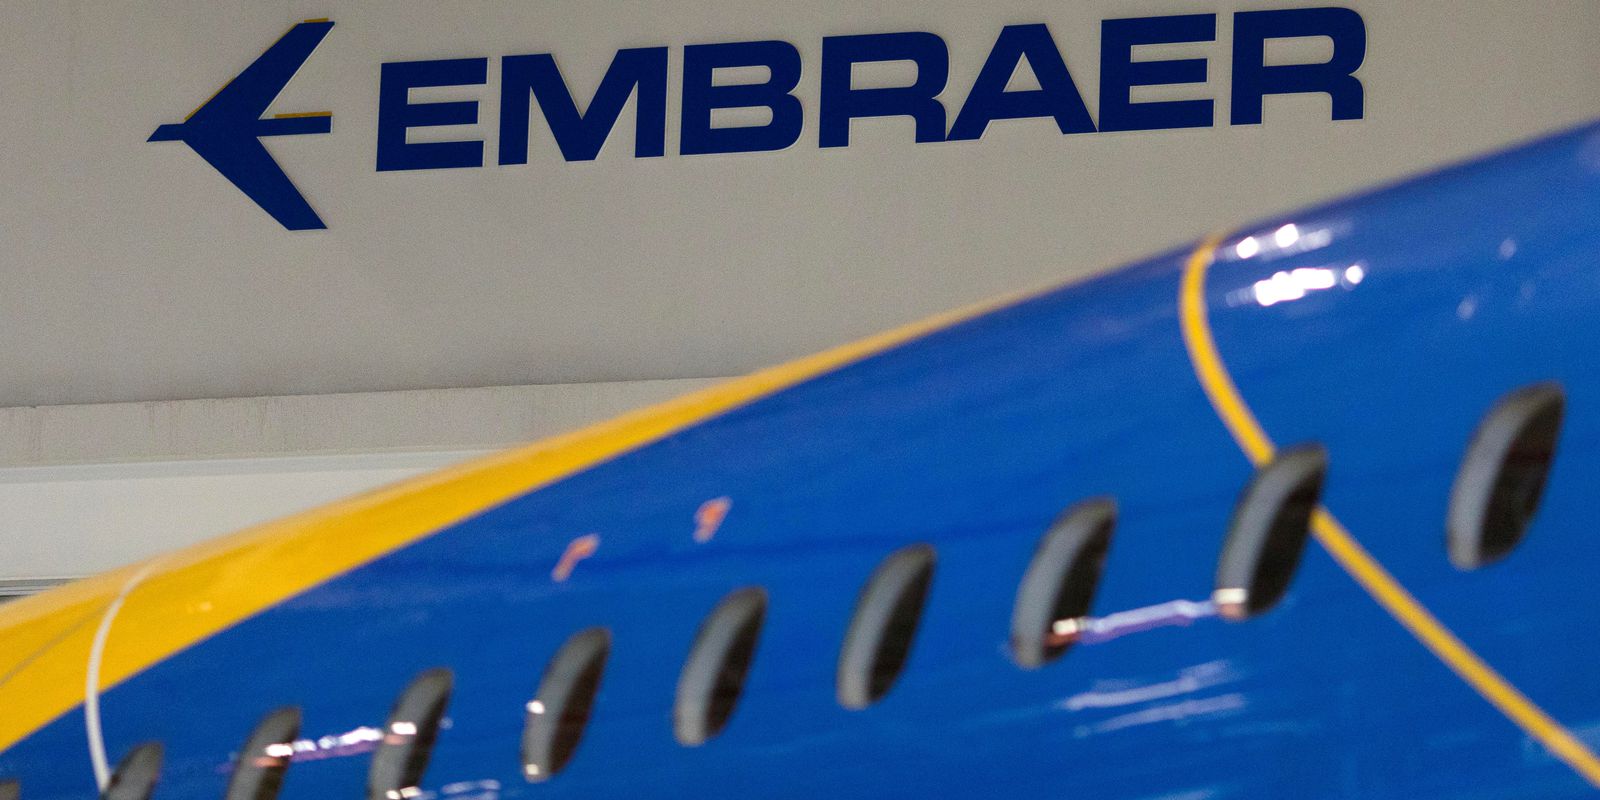 Embraer has a loss of R$ 170 million in the first quarter